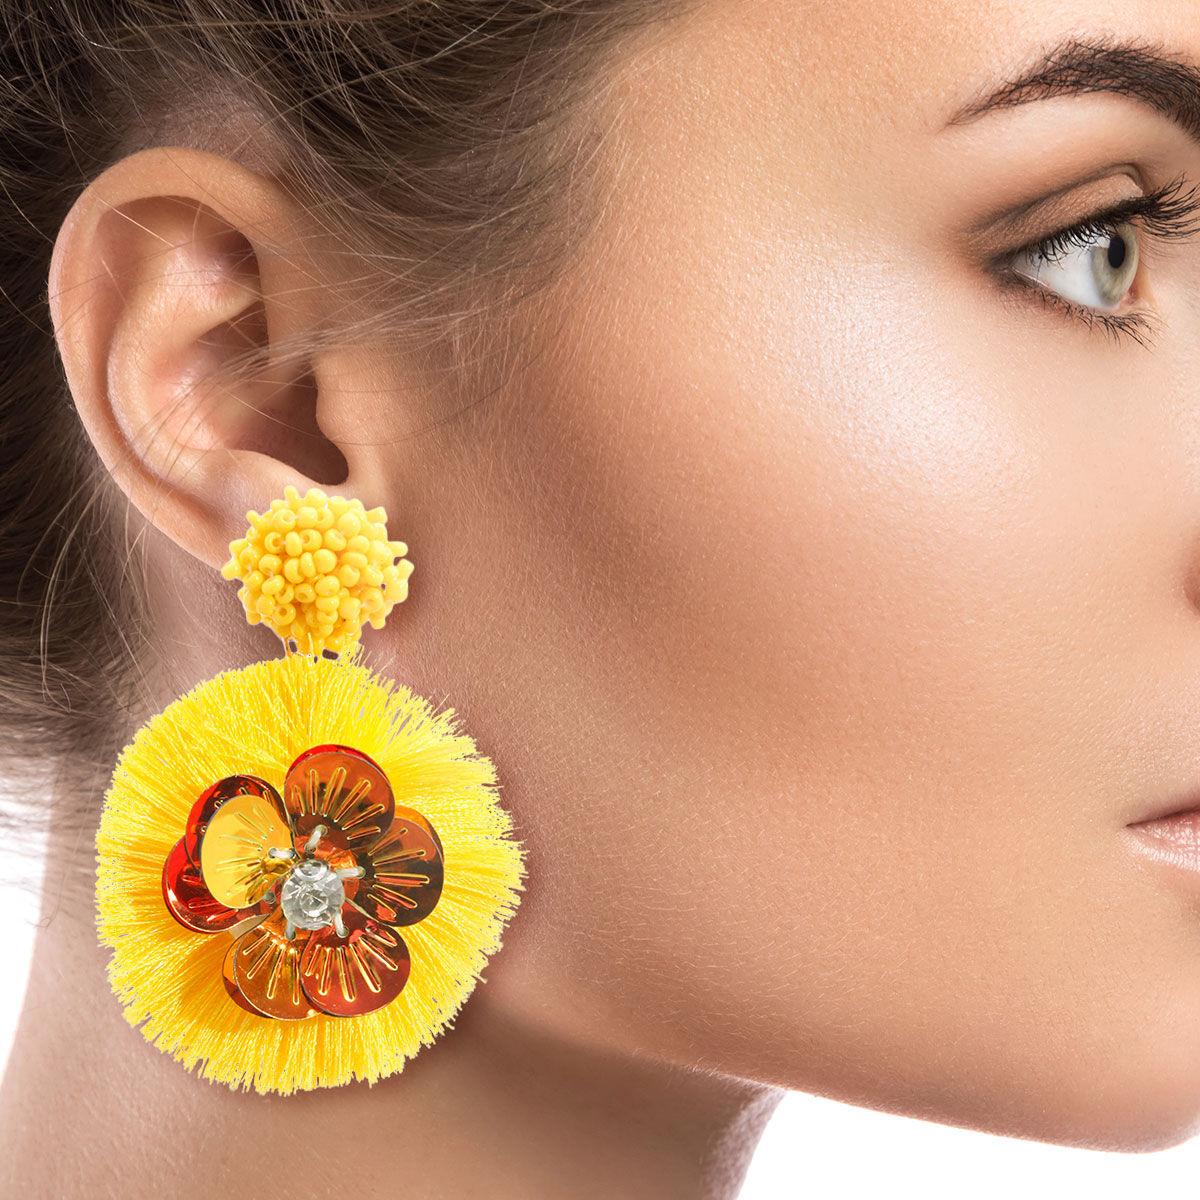 Yellow Candy Flower Earrings - Spring Style Blooms in Chic Fashion